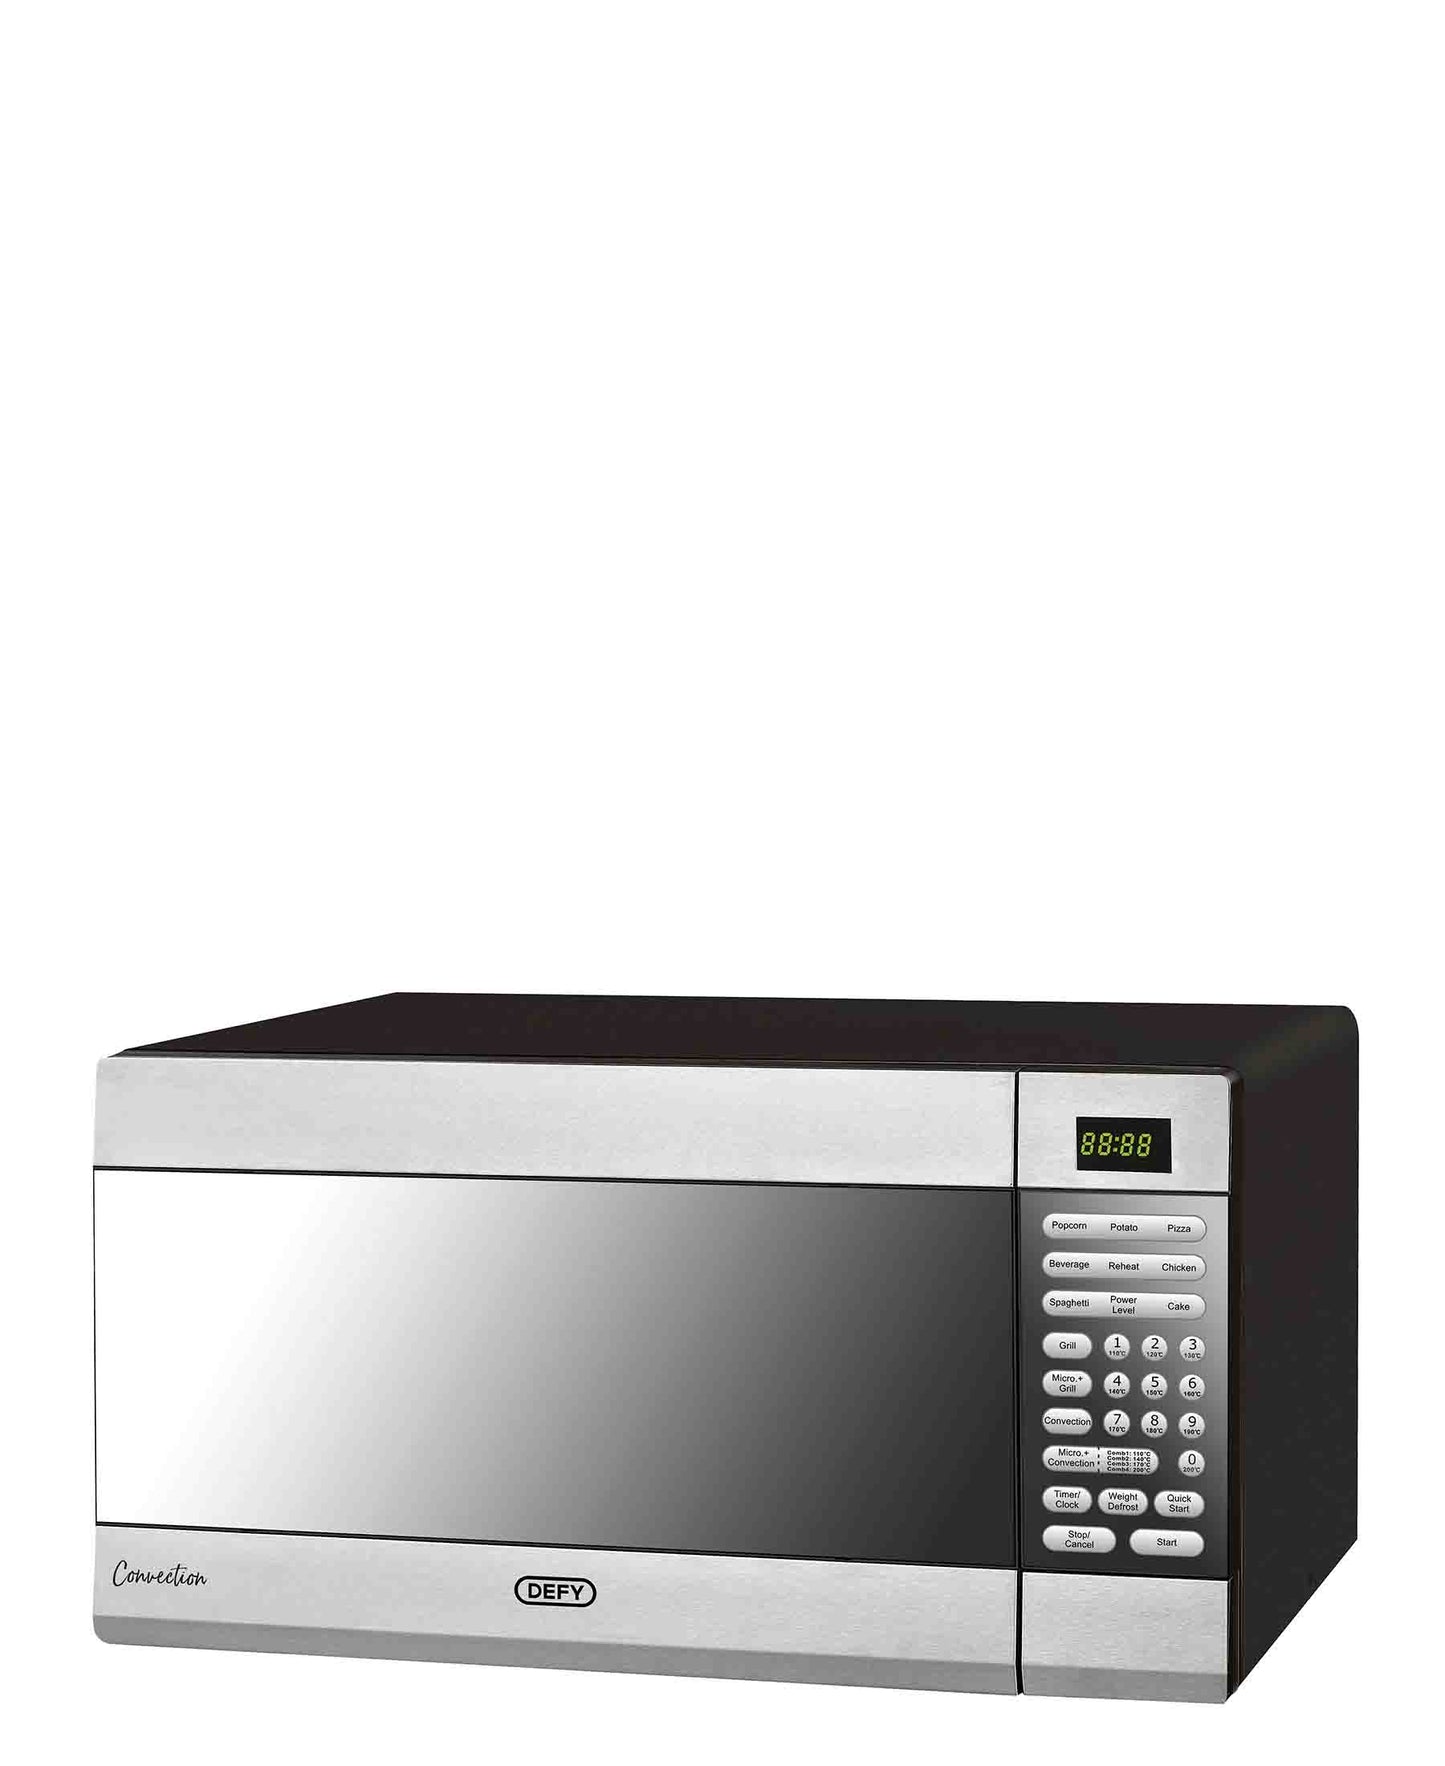 Defy 43l Convection Microwave - Silver